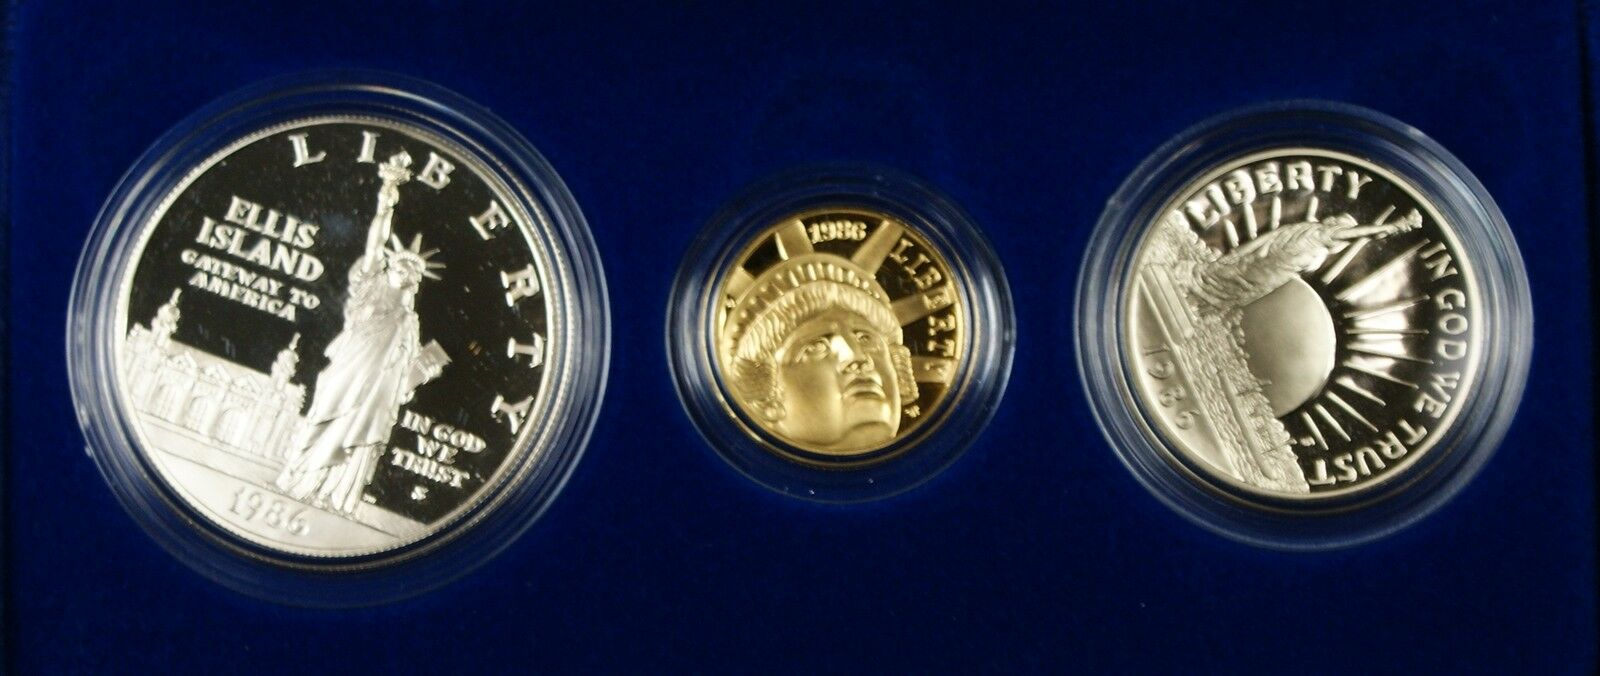 1986 Liberty 3 Coin Proof Commemorative Set Gold $5 Silver $1